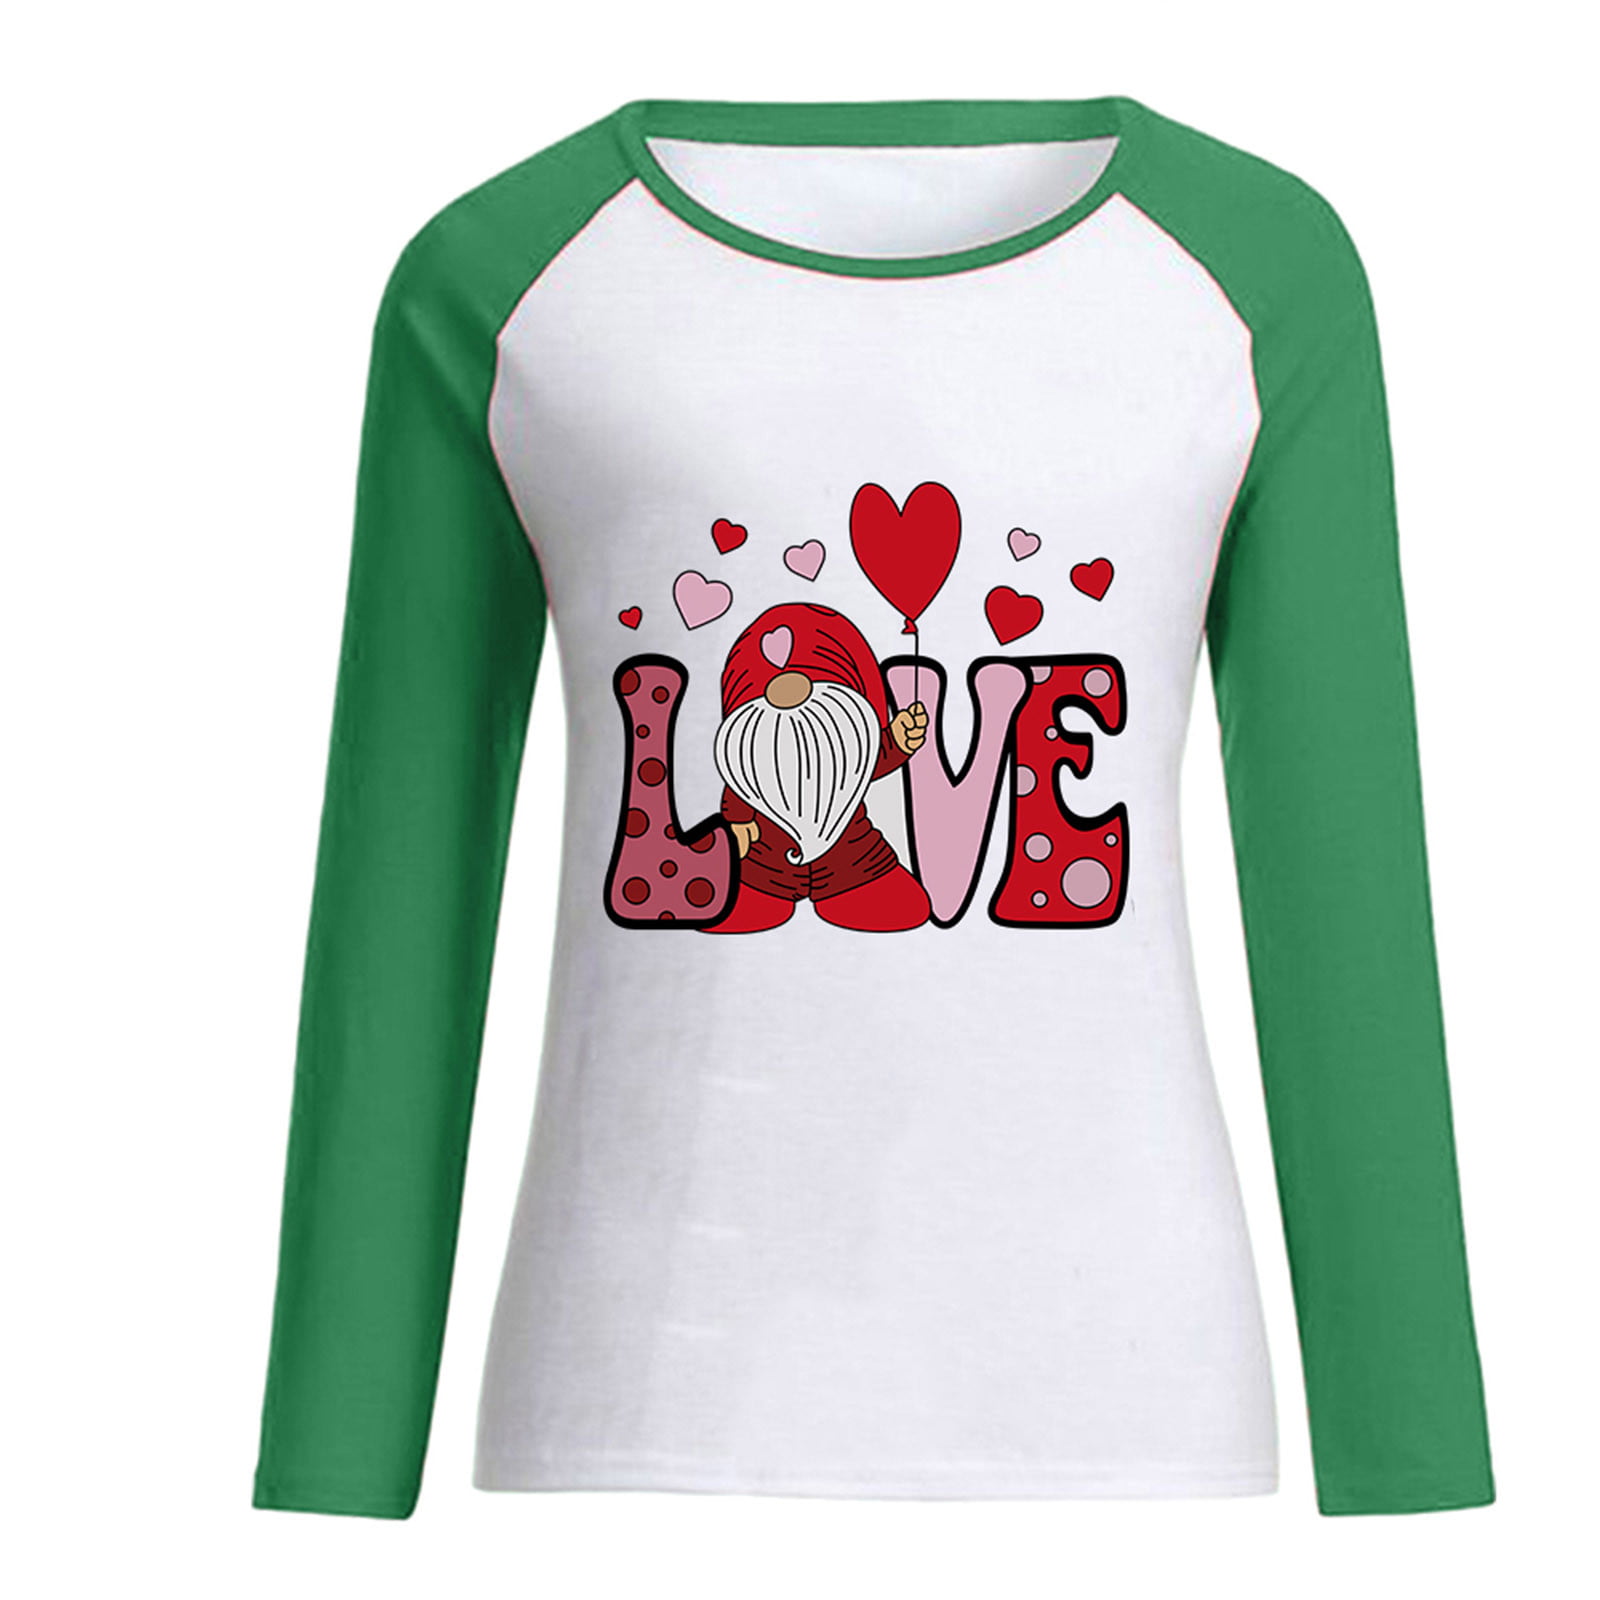  Women Funny Plaid Love Valentine's Day t-Shirt  Clearance  Items Outlet 90 Percent Off Womens Clothes Pink : Sports & Outdoors